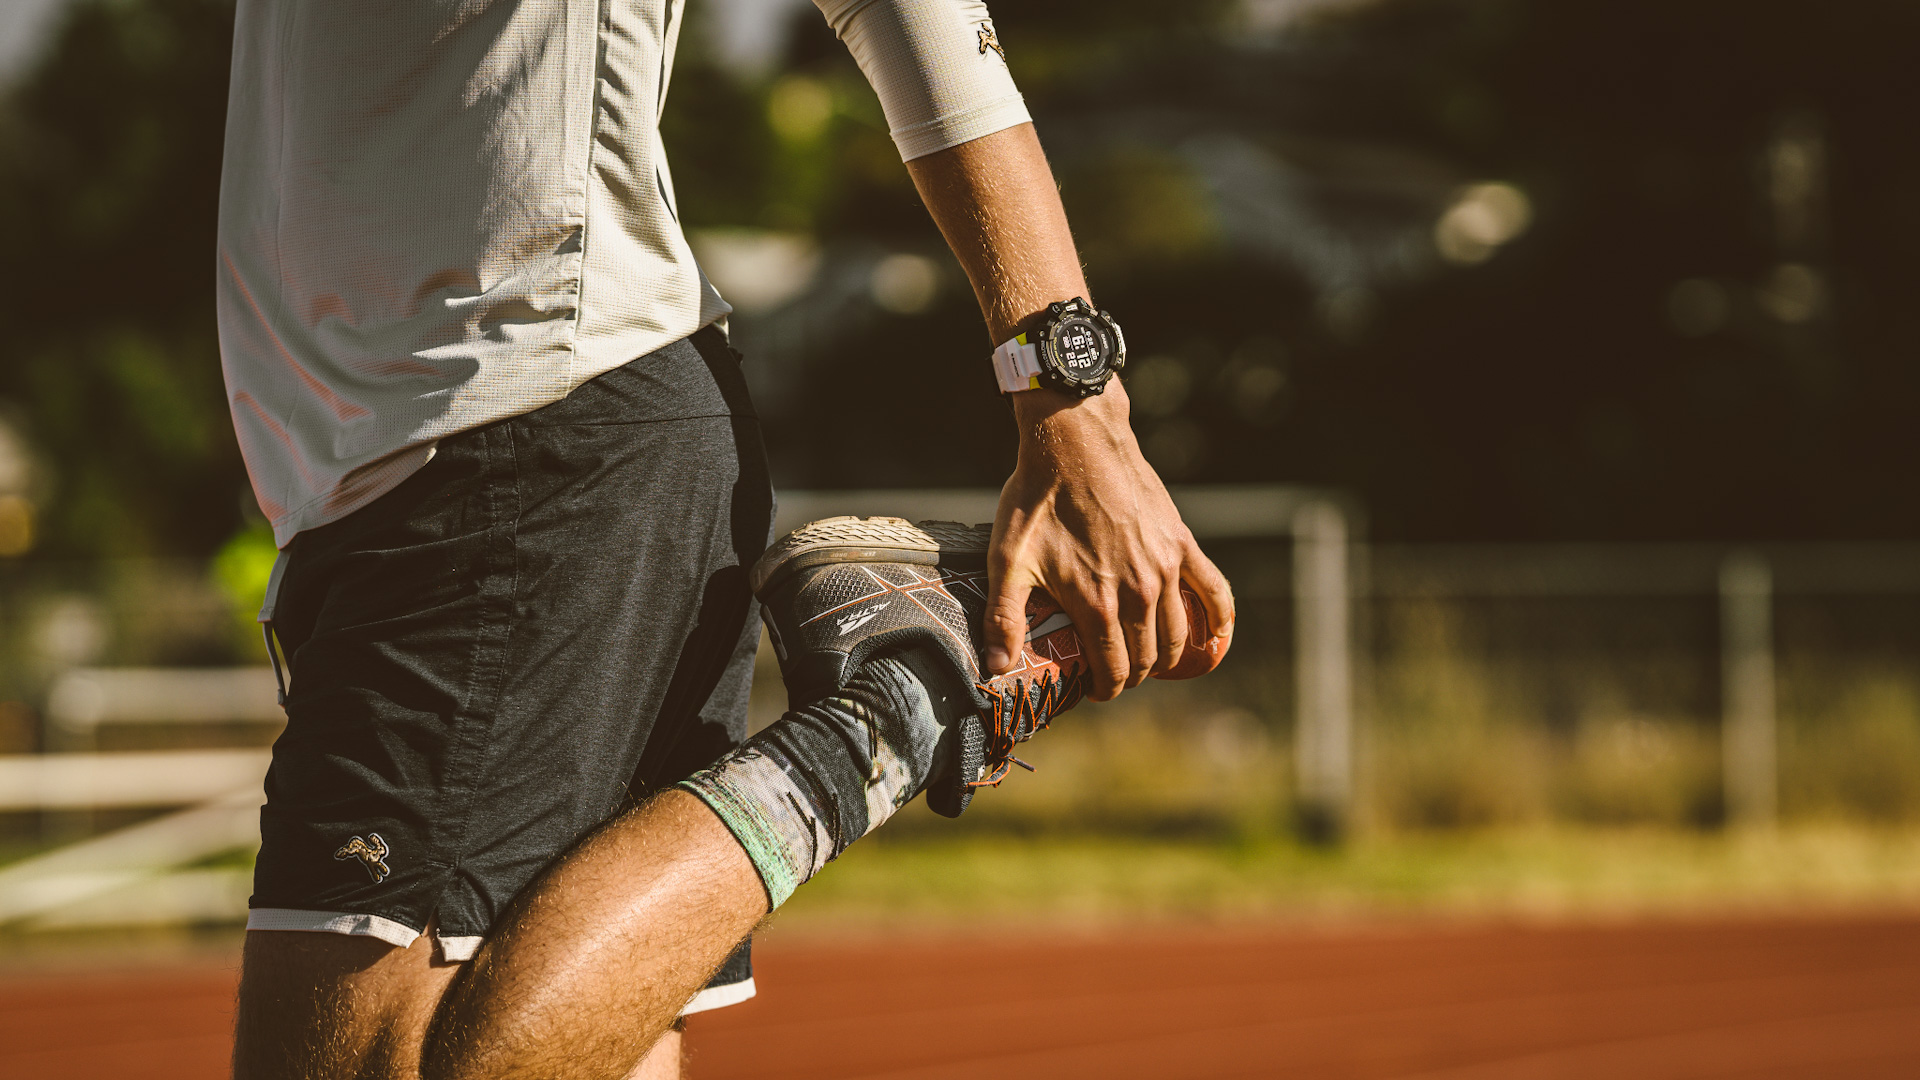 Quickstart Guide To Exercise Tracking With The Casio G-Shock Move GBDH1000